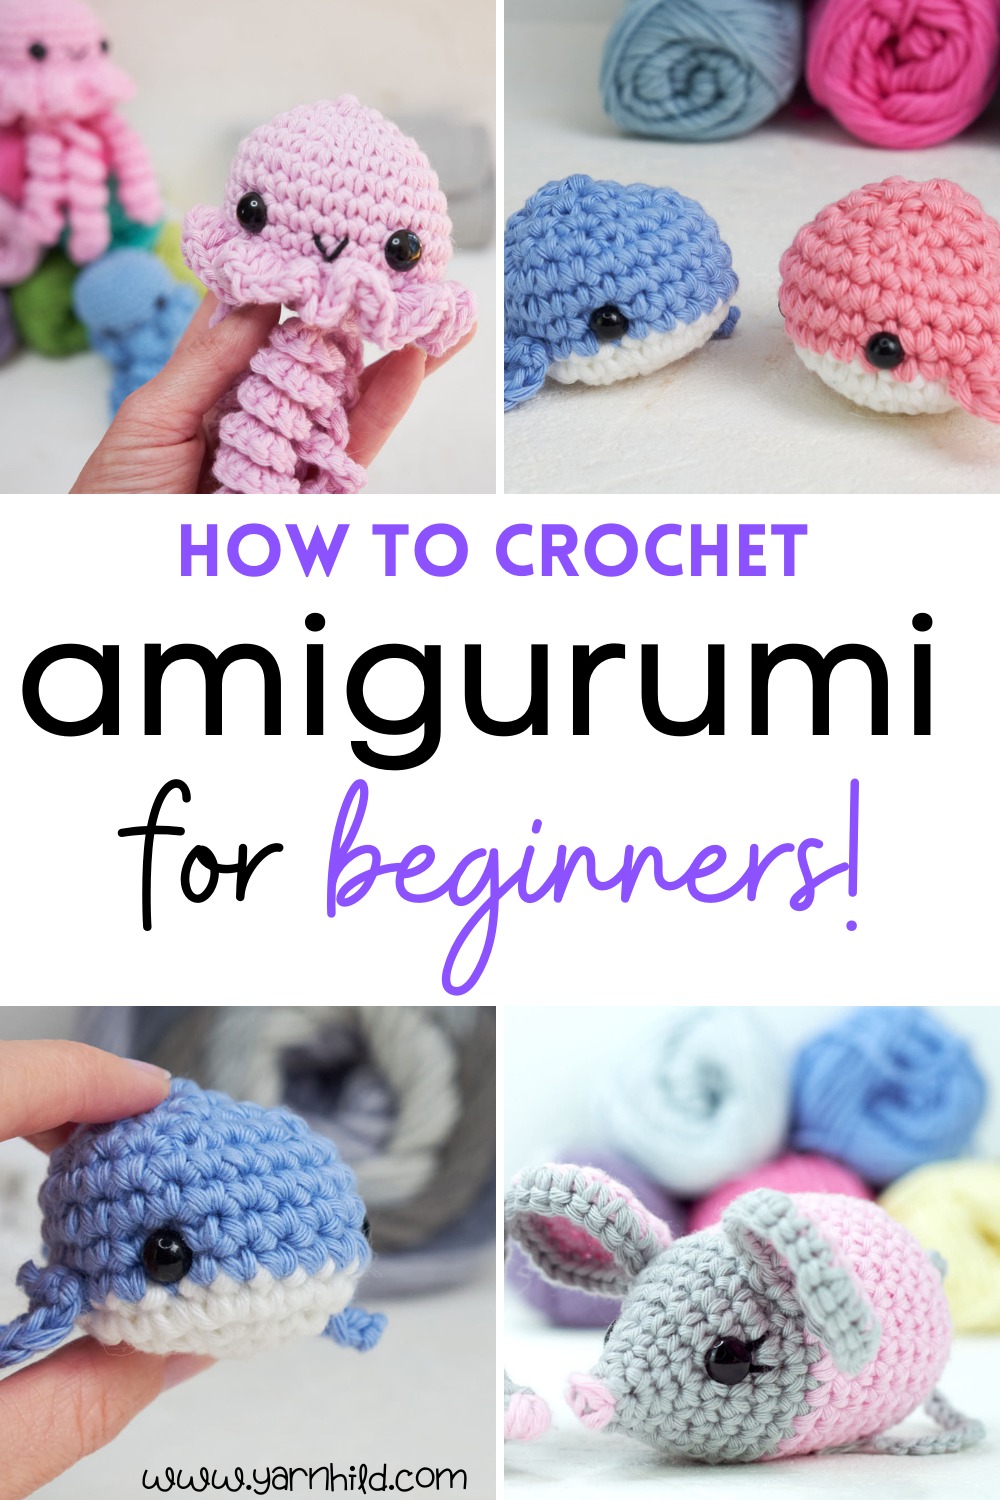 How to crochet amigurumi for absolute beginners